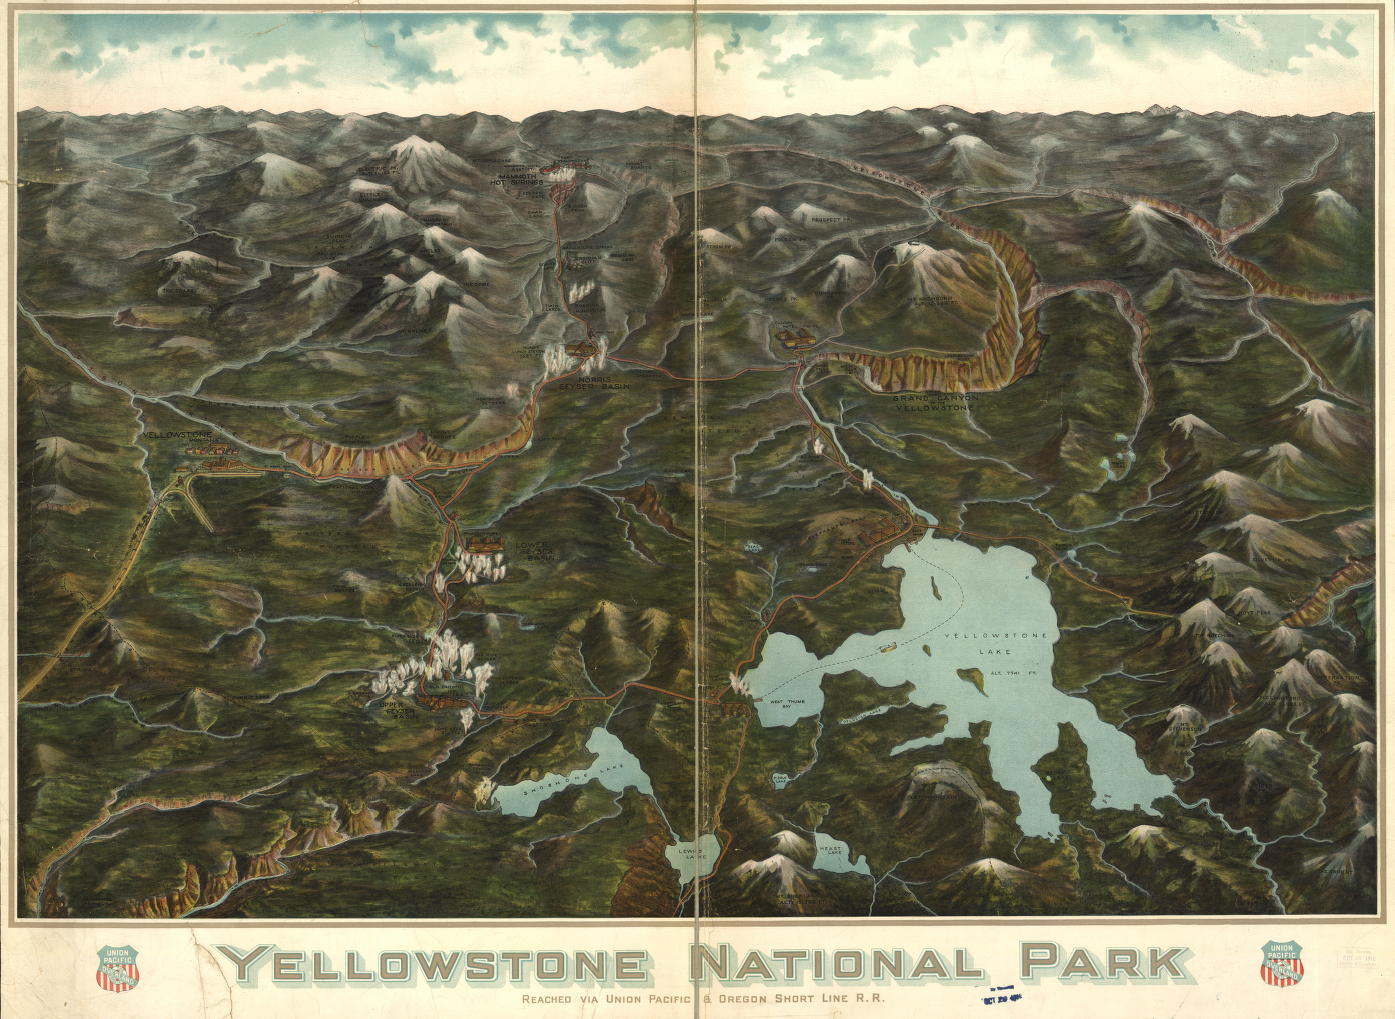 Yellowstone National Park Union Pacific Historical Map from the Library of Congress Collection